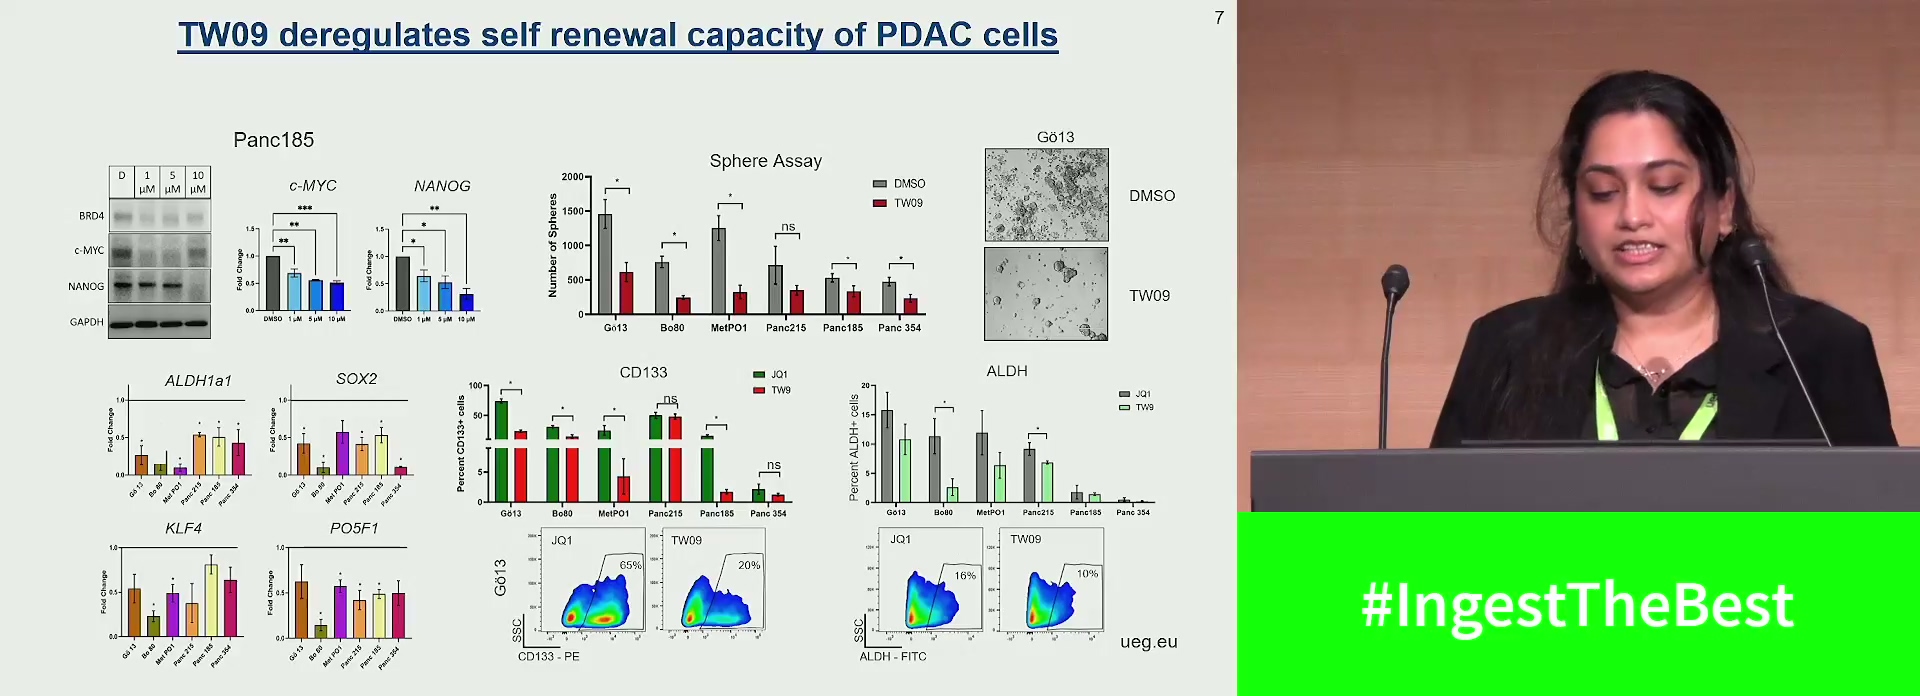 SELECTIVE ELIMINATION OF CD133+ CANCER STEM CELLS AS THERAPY FOR PDAC USING NOVELDUAL BET/HDAC INHIBITOR TW09